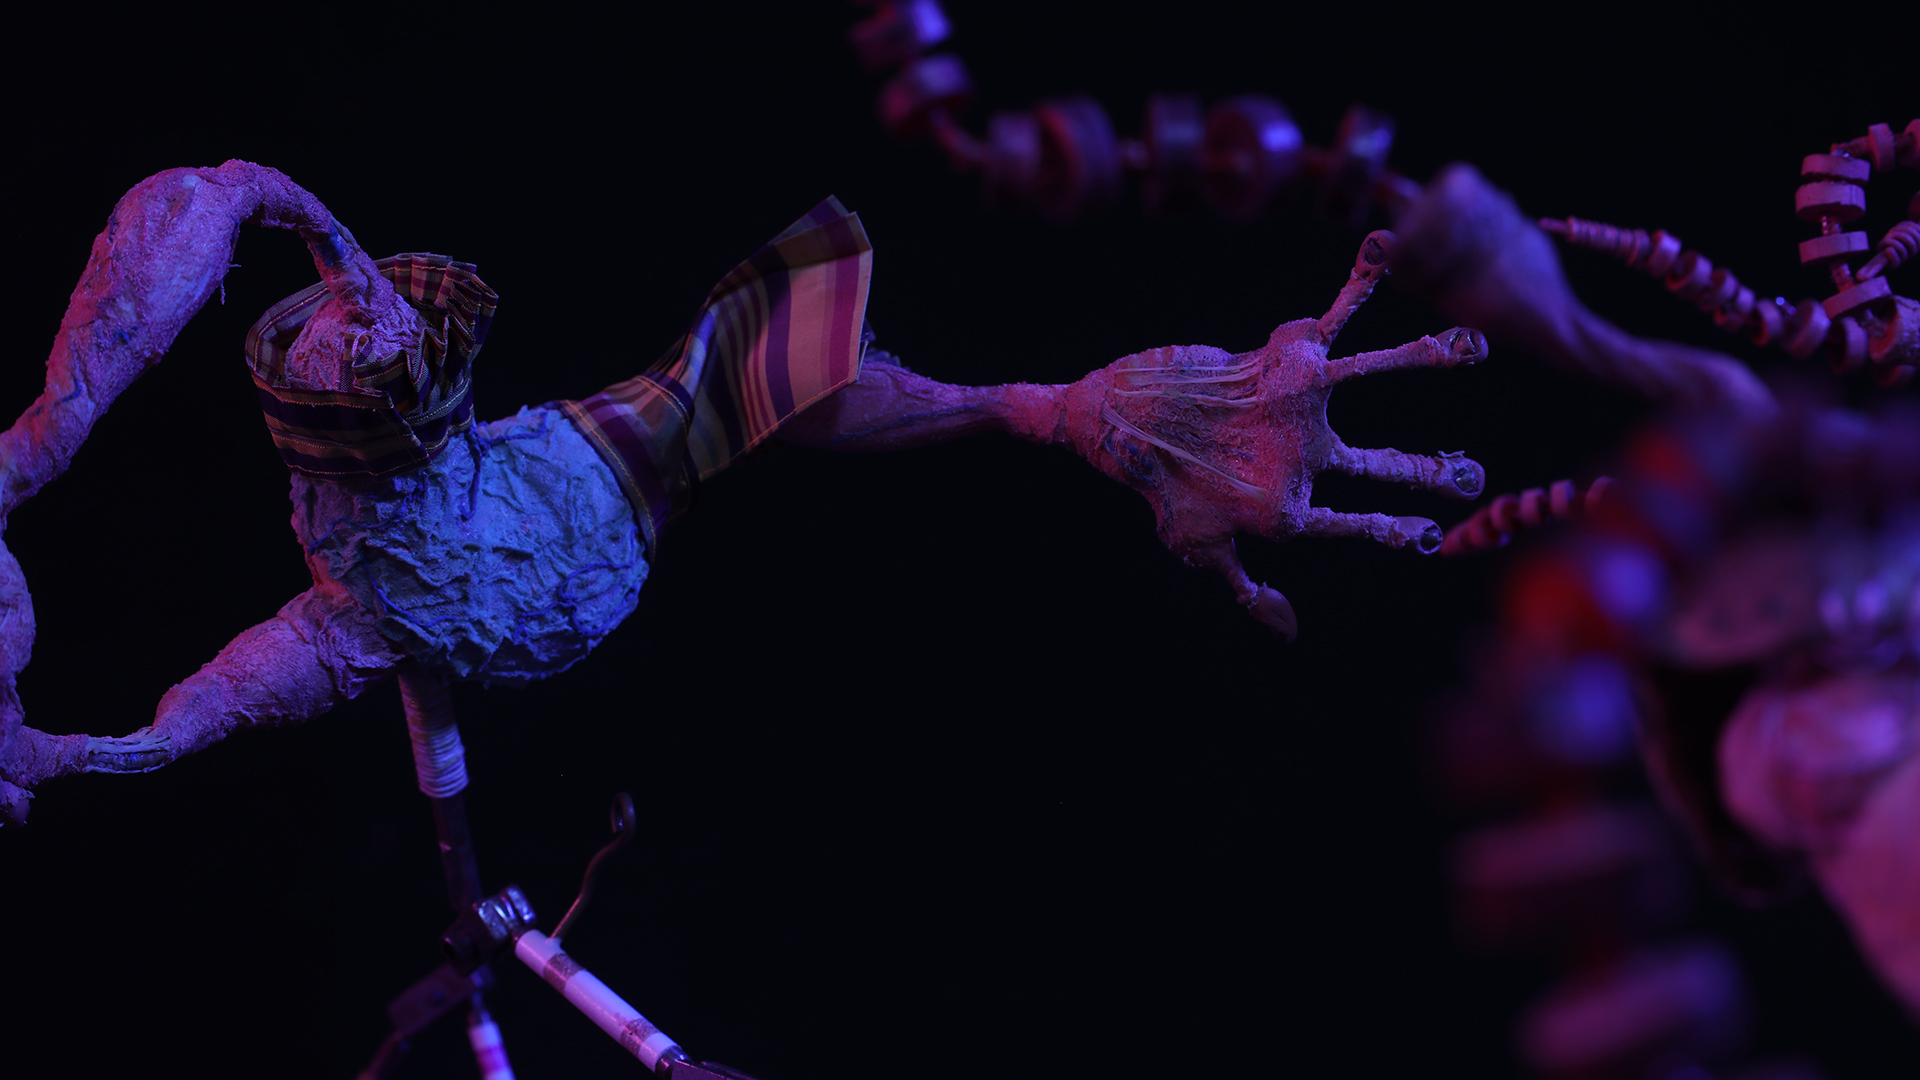 In this screen still from a puppet stop motion animation, a creepy abstract form contains a hand reaching out toward the right. It is made from a dehydrated-looking, wrinkled material and the hand is misshapen, but does contain five fingers. A patch of plaid fabric sits on the shoulder and is tied around the 